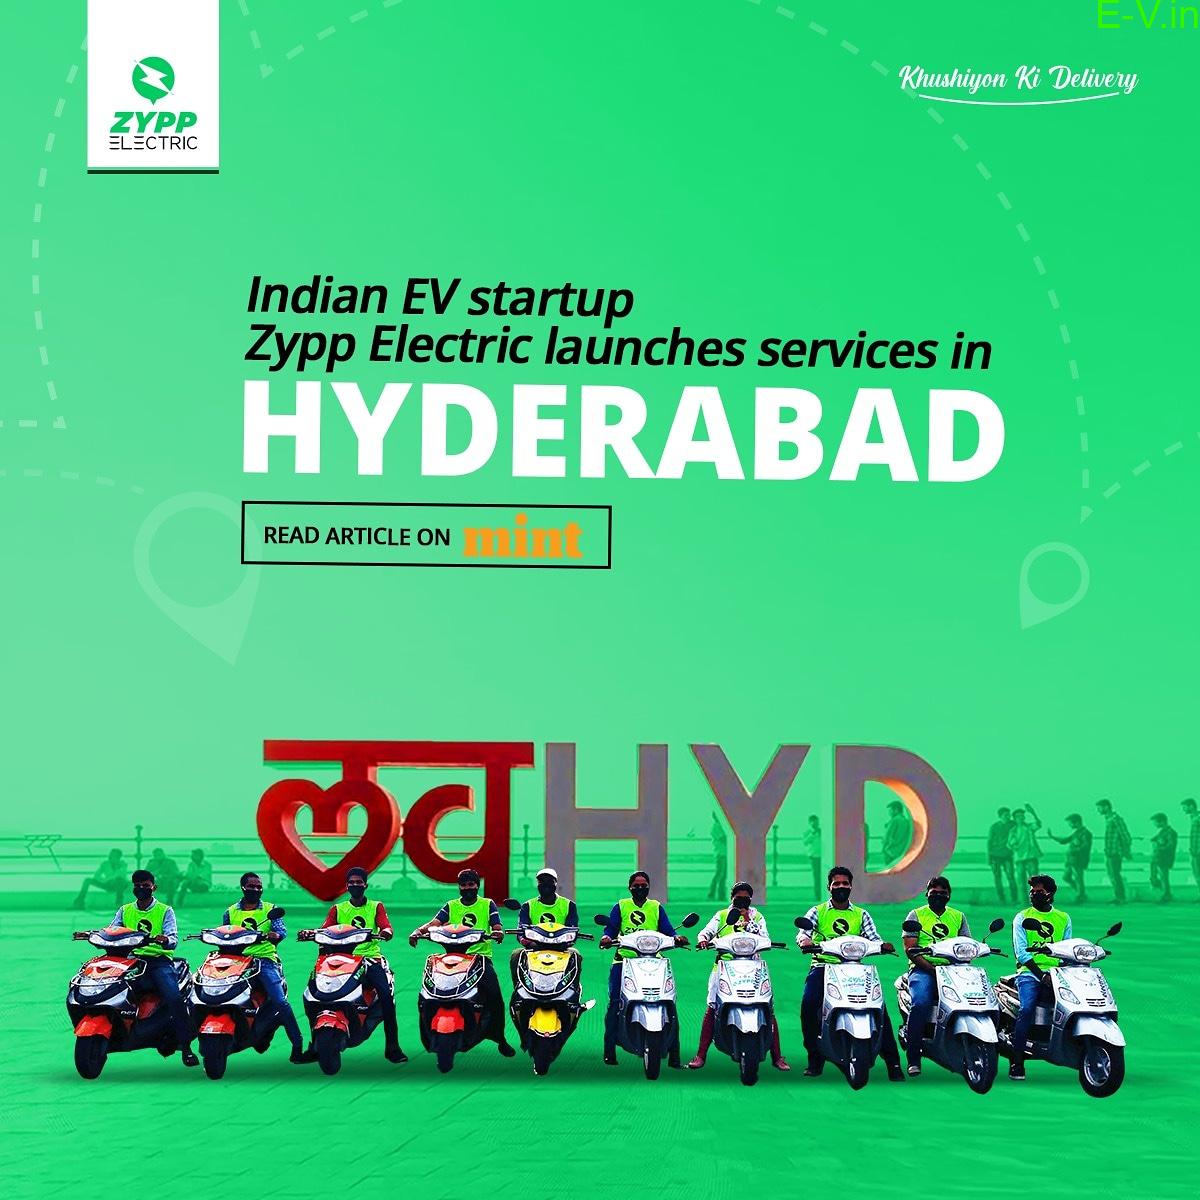 Zypp Electric services in Hyderabad